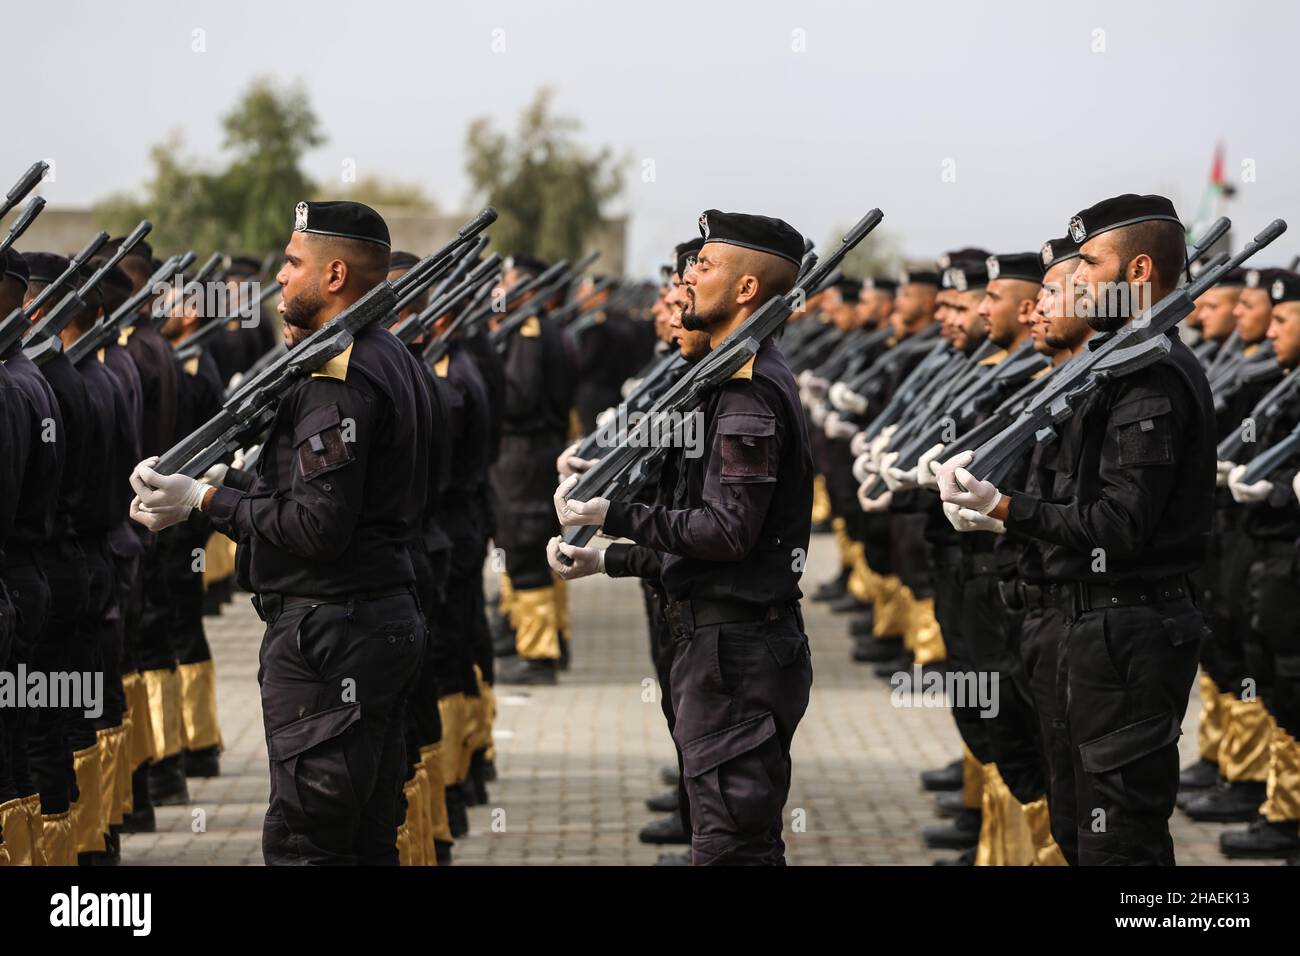 Gaza, Palestine. 12th Dec, 2021. Members of the Palestinian security forces loyal to Hamas, stand during a graduation ceremony for police officers, in Gaza City.Hamas arranges a graduation ceremony for police officers to show their military skills to the public. Hamas Intensifying military courses for its police forces to avoid Israeli threats that may threaten internal security in the Gaza Strip, according to the Hamas Interior Ministry spokesman. (Photo by Ahmed Zakot/SOPA Images/Sipa USA) Credit: Sipa USA/Alamy Live News Stock Photo